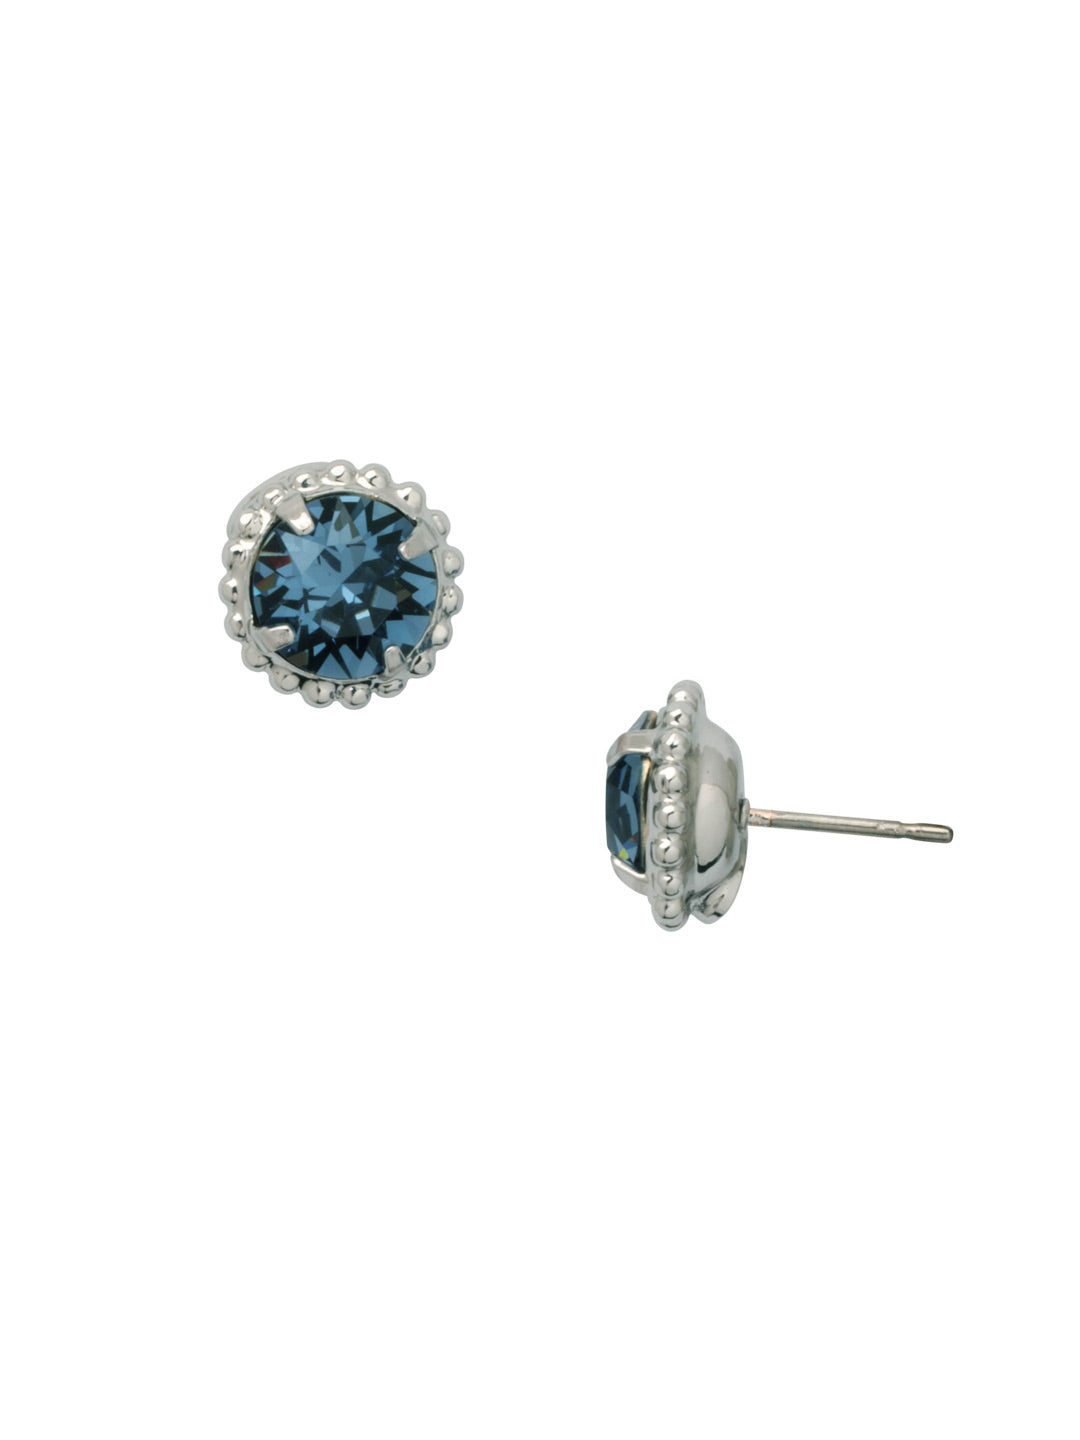 Simplicity Stud Earrings - EBY38PDASP